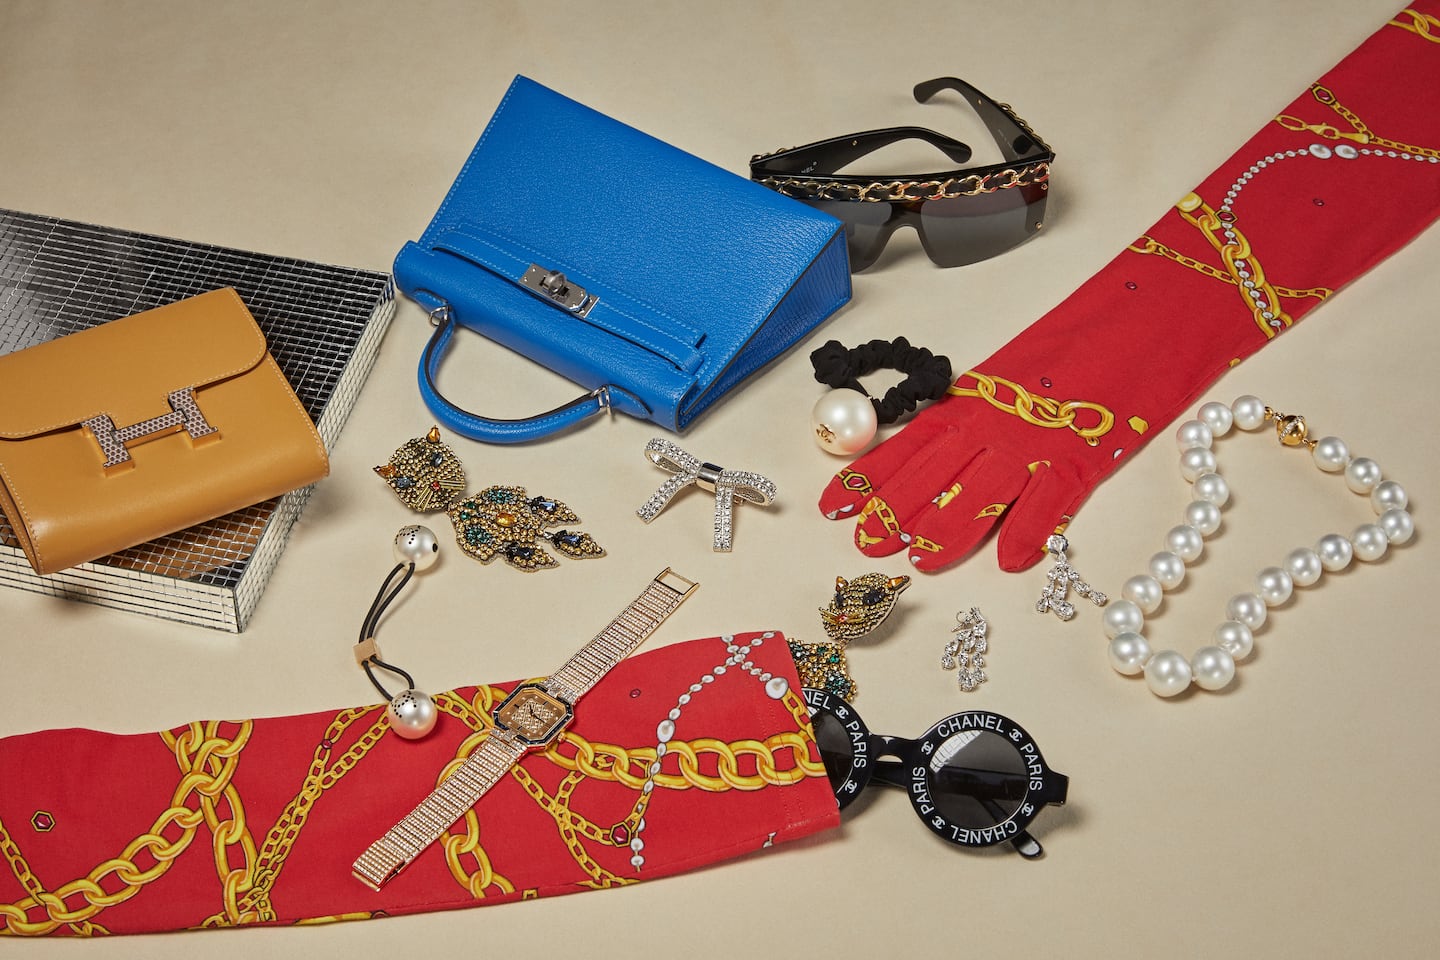 Rare fashion pieces selling on The RealReal, including handbags, jewellery and watches.